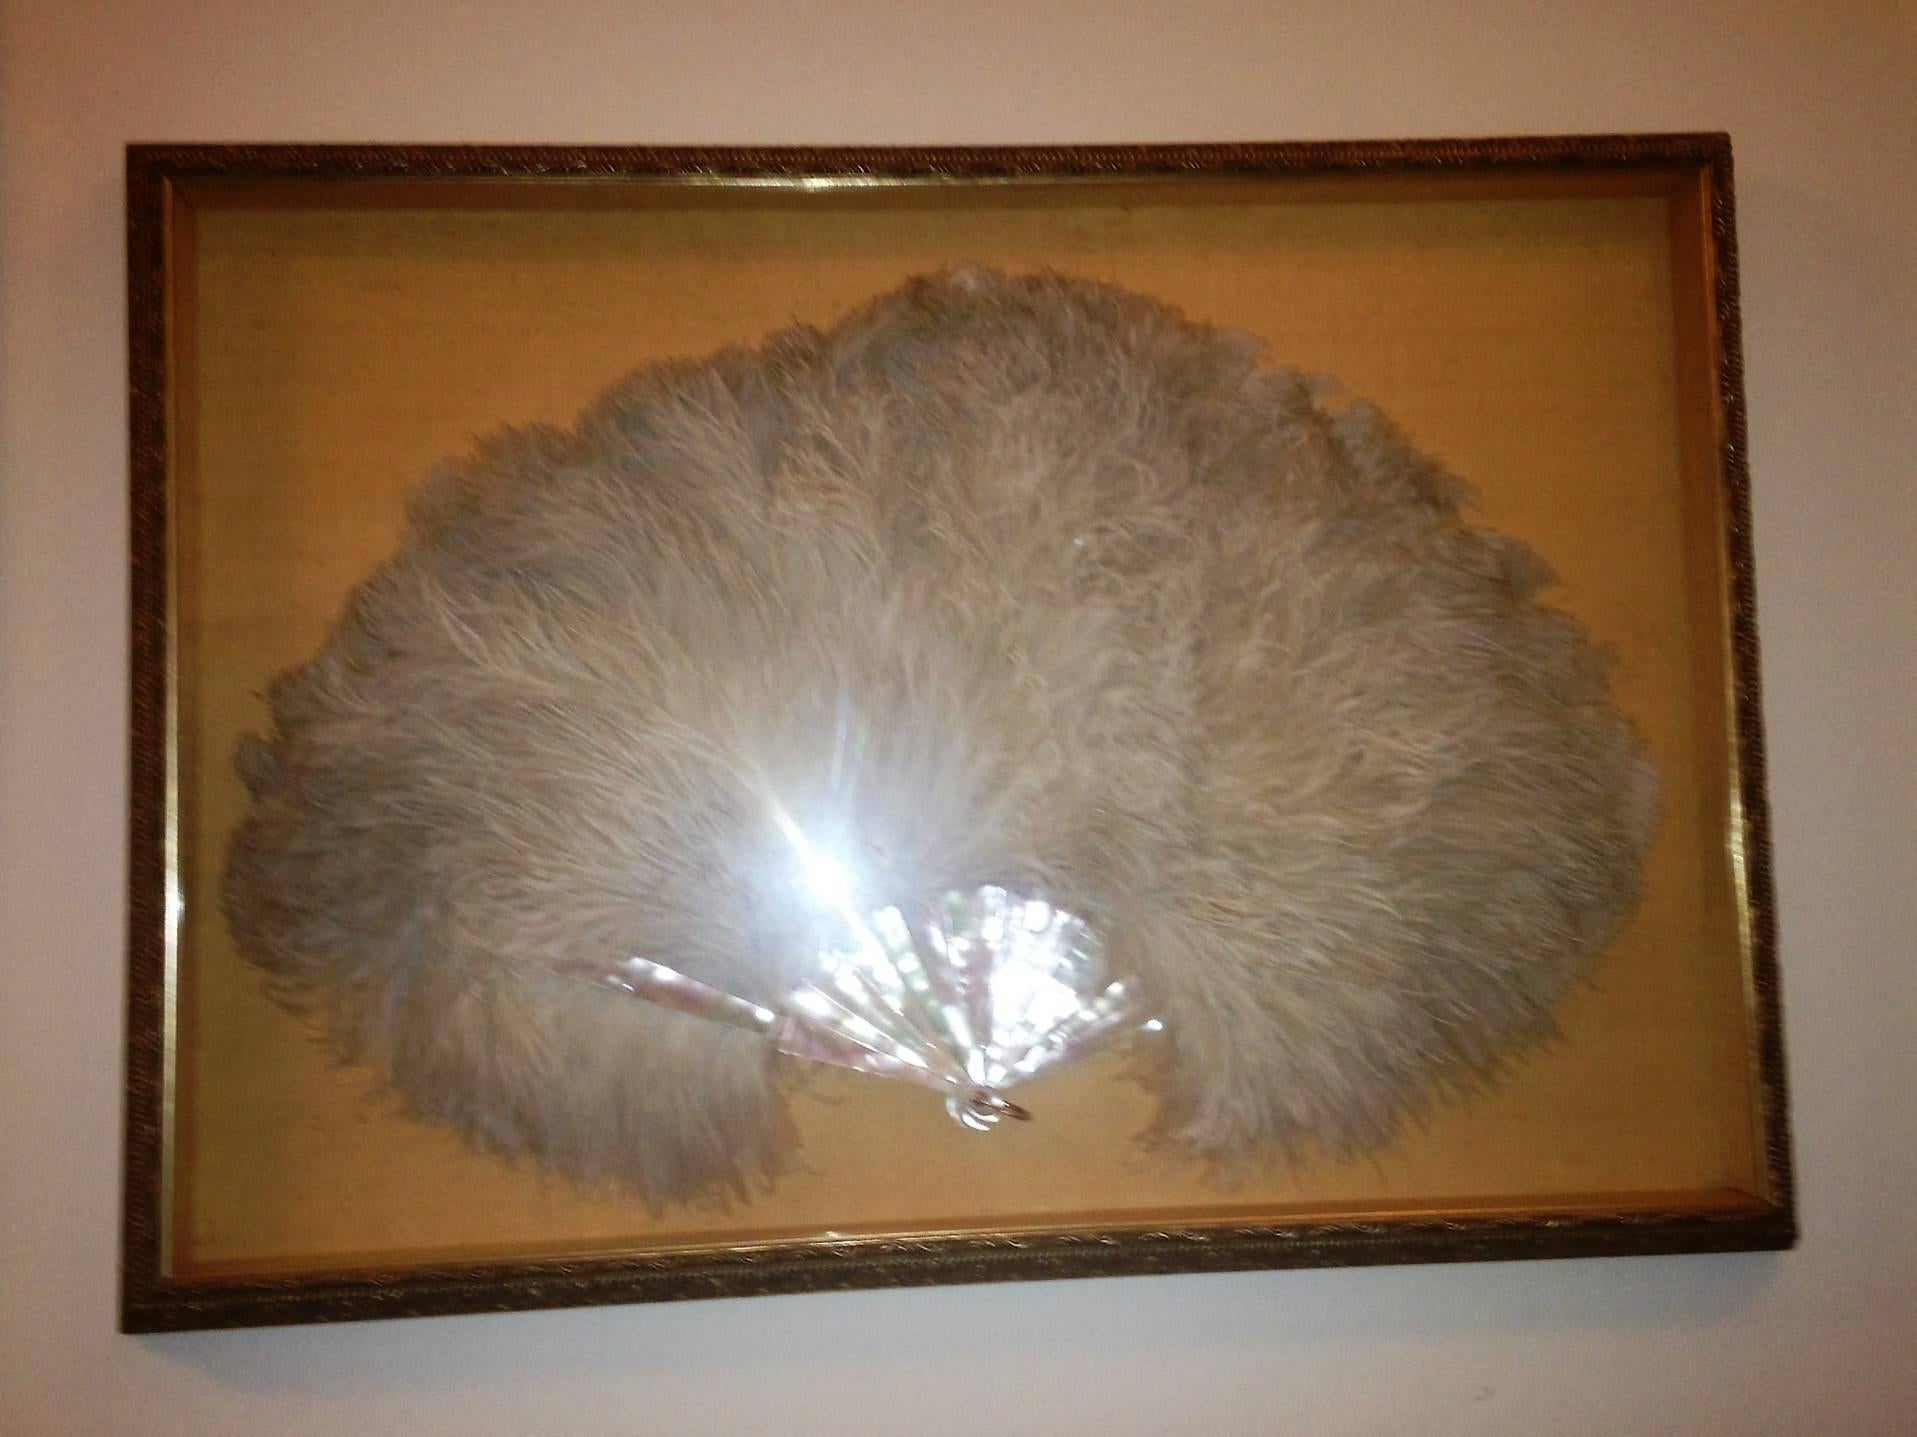 Beautiful Opulent Flapper Era Ostrich feather fan with mother-of-pearl handle and gold filled ring holder marked Tiffany & Co. Mounted on beautiful fabric in quality silver leaf frame, this is a great wall hanging for a High End Feminine Boudoir. I